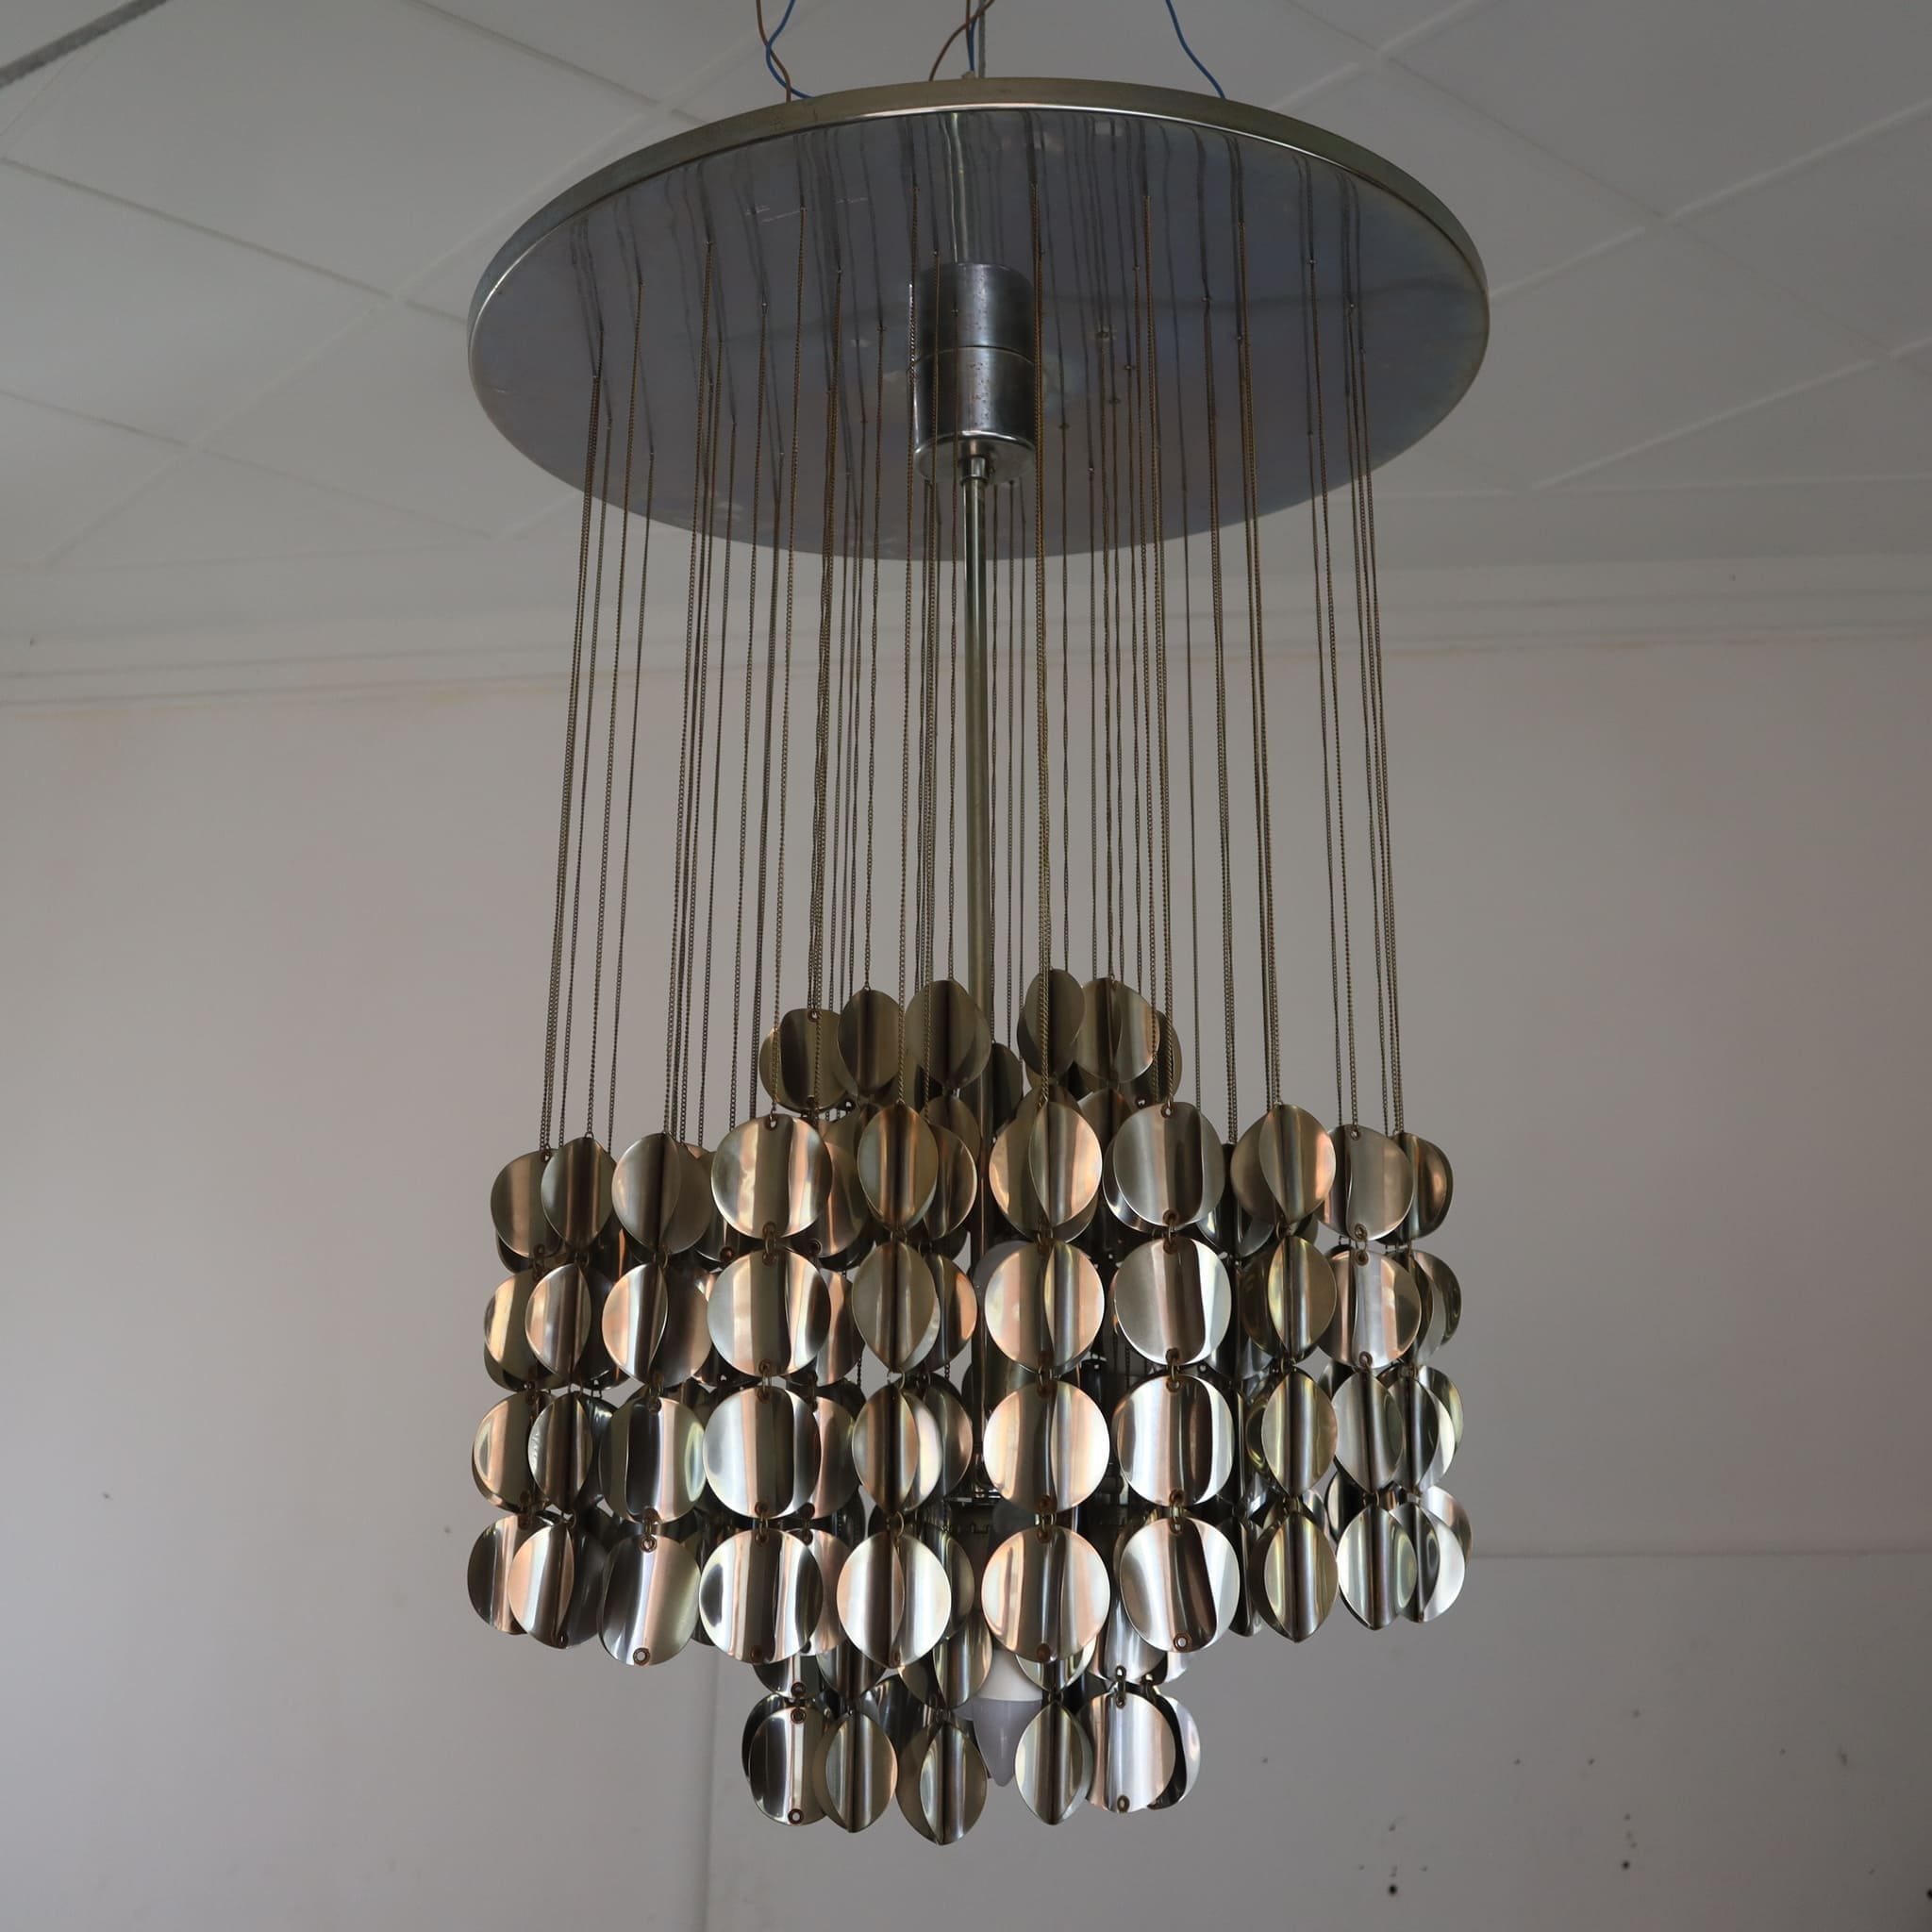 visionidepoca-modern-antique-chandelier-with-steel-pendants-from-the-70s-front-view